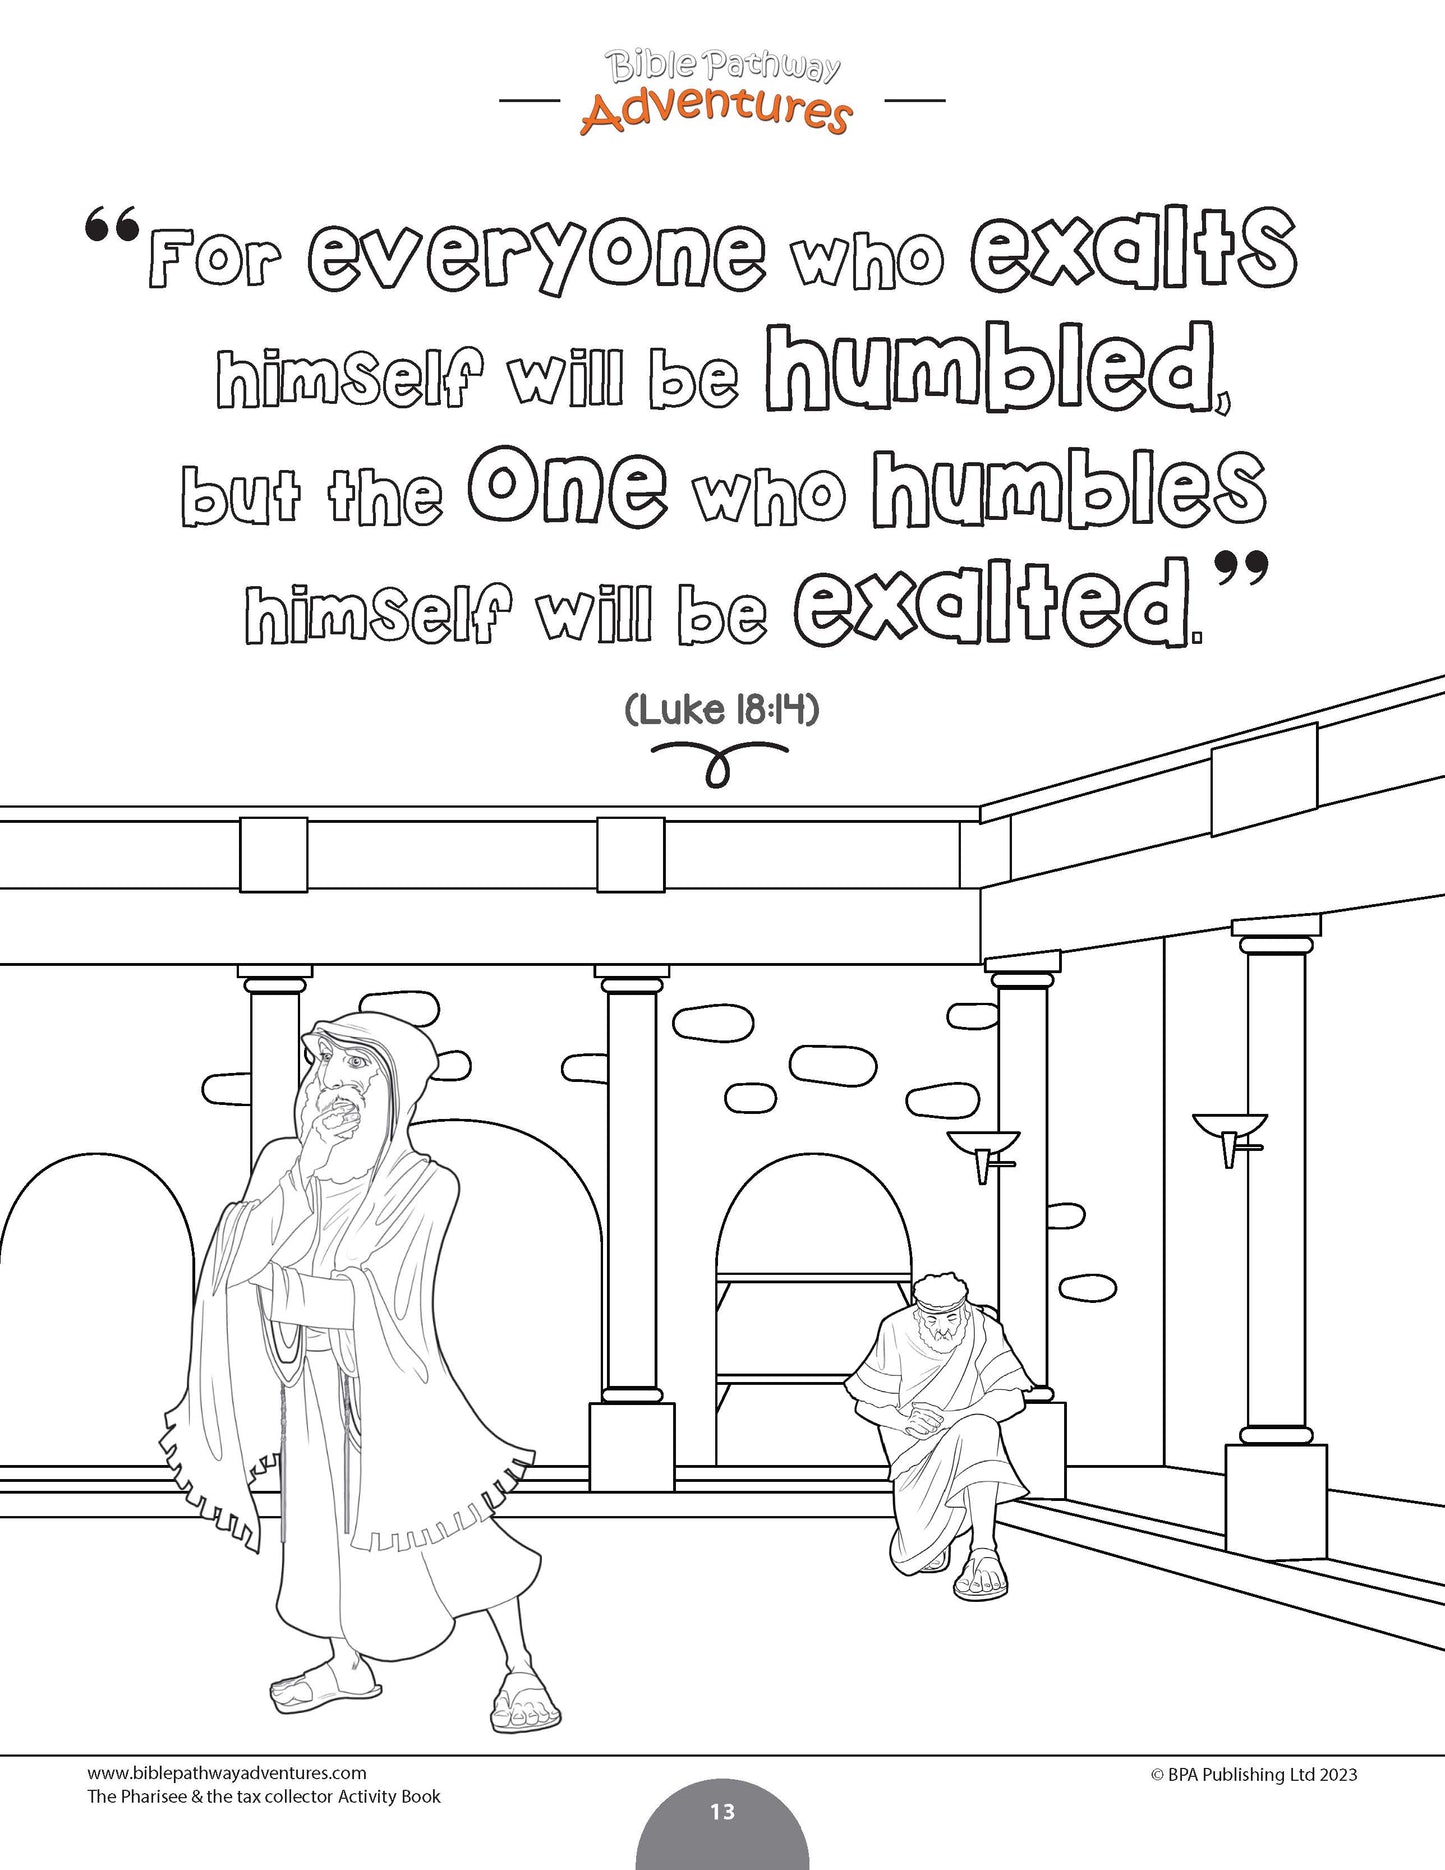 Parable of the Pharisee & the Tax Collector Activity Book (PDF)